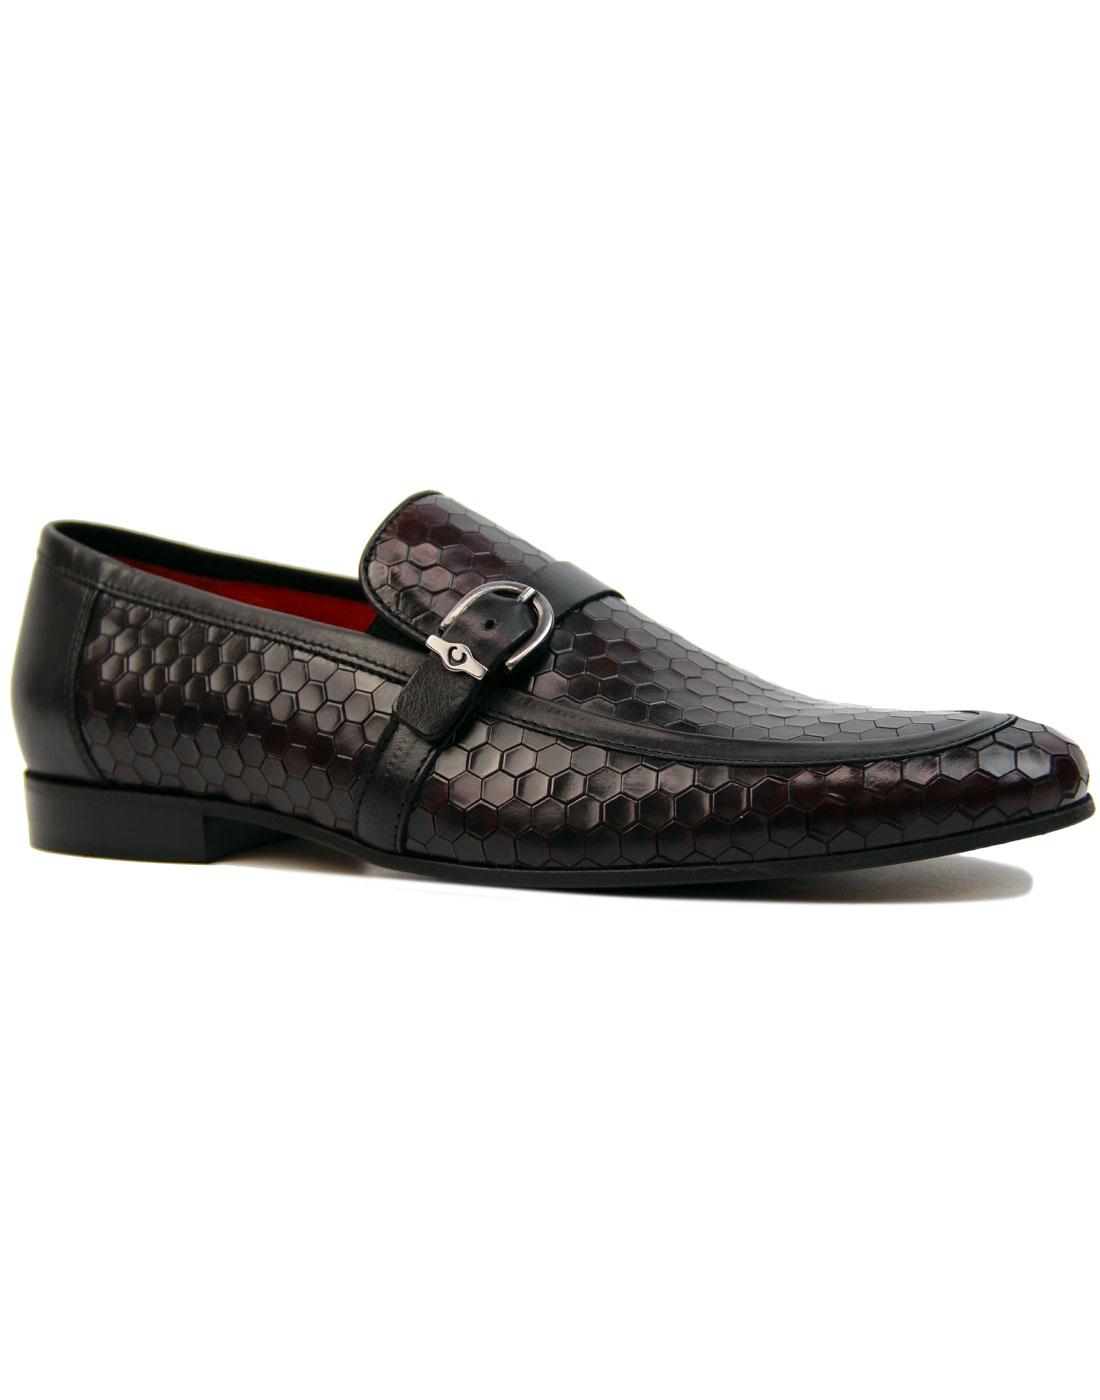 Lane LACUZZO Mod Honeycomb Leather 2 Tone Loafers